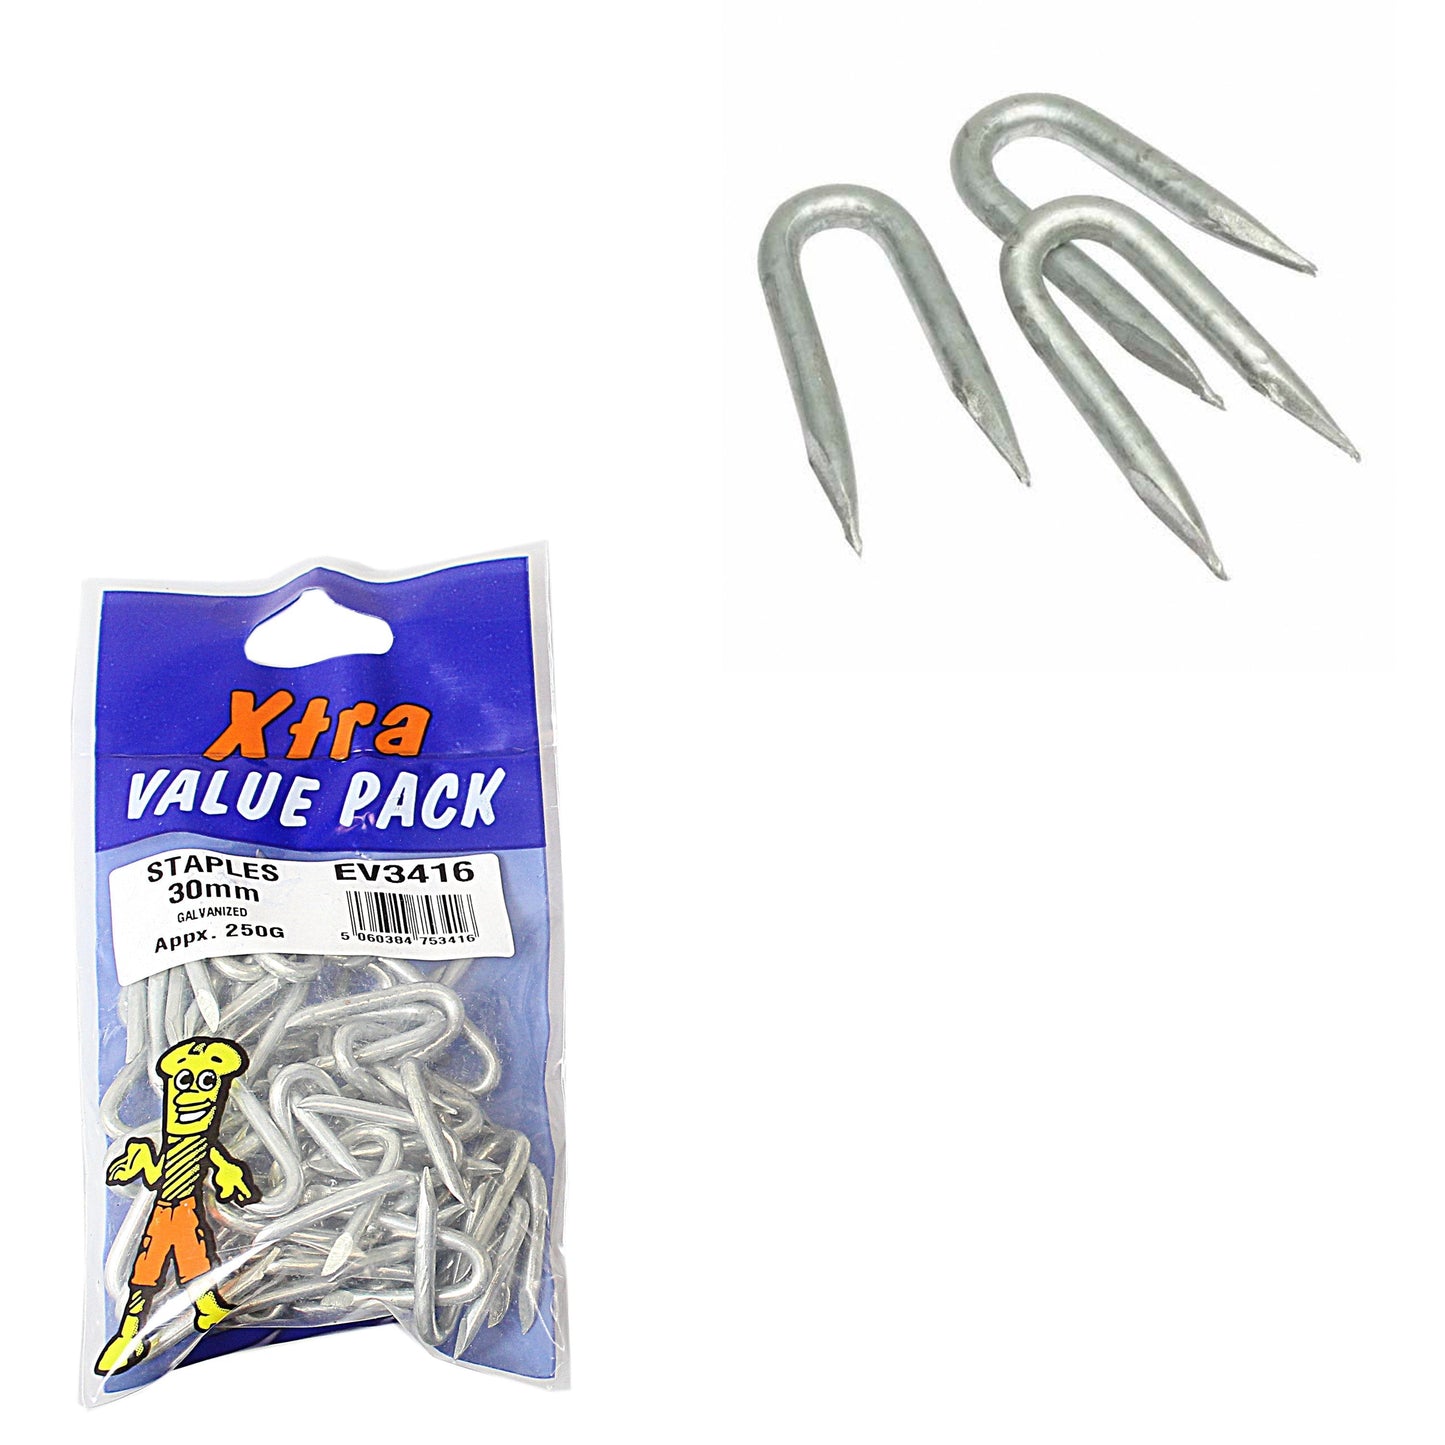 30mm Galvanised Staples 250g Xtra Value Diy 3416 (Large Letter Rate)